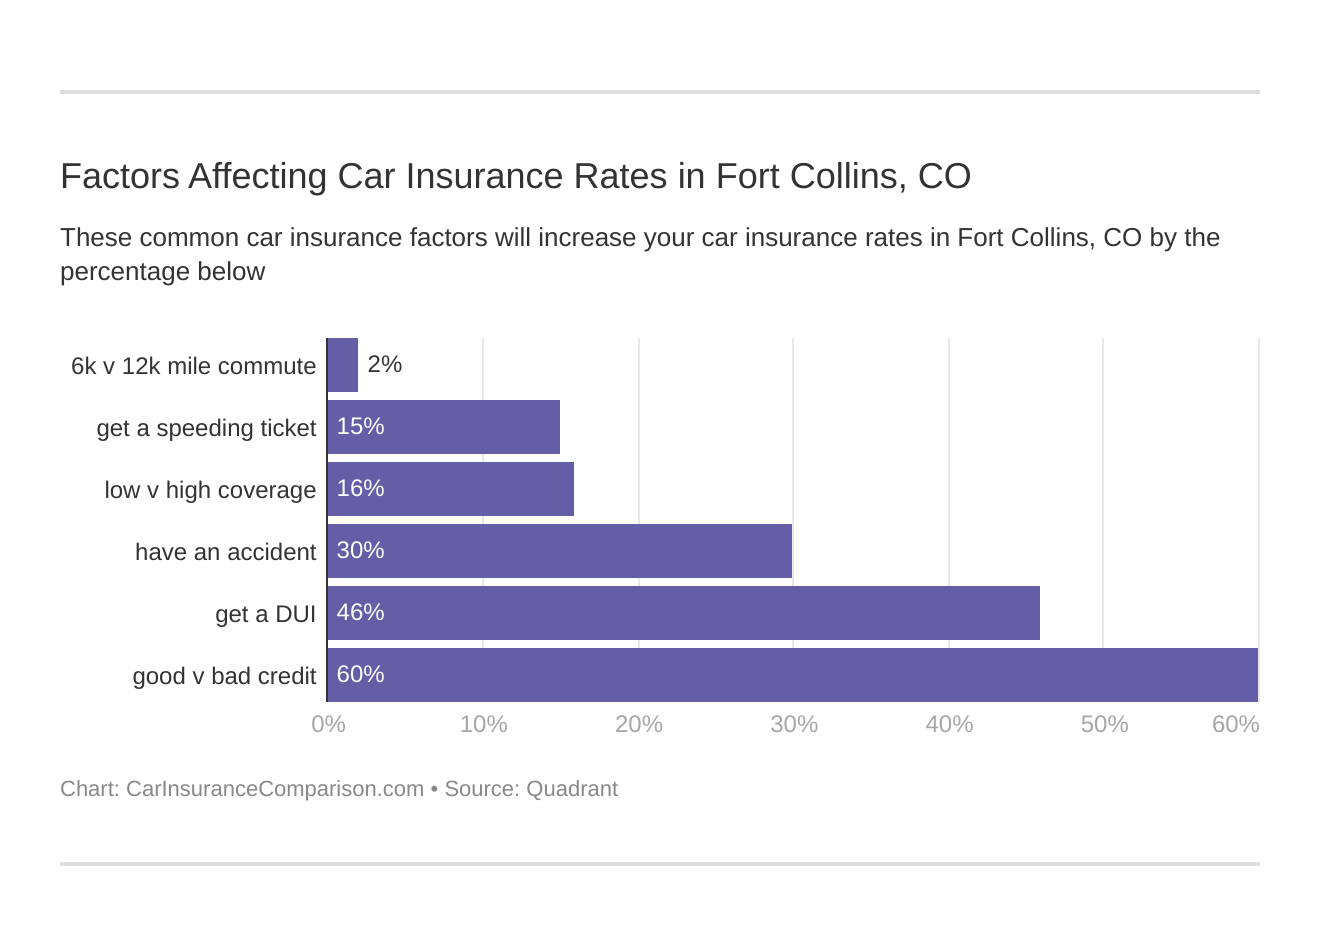 Factors Affecting Car Insurance Rates in Fort Collins, CO